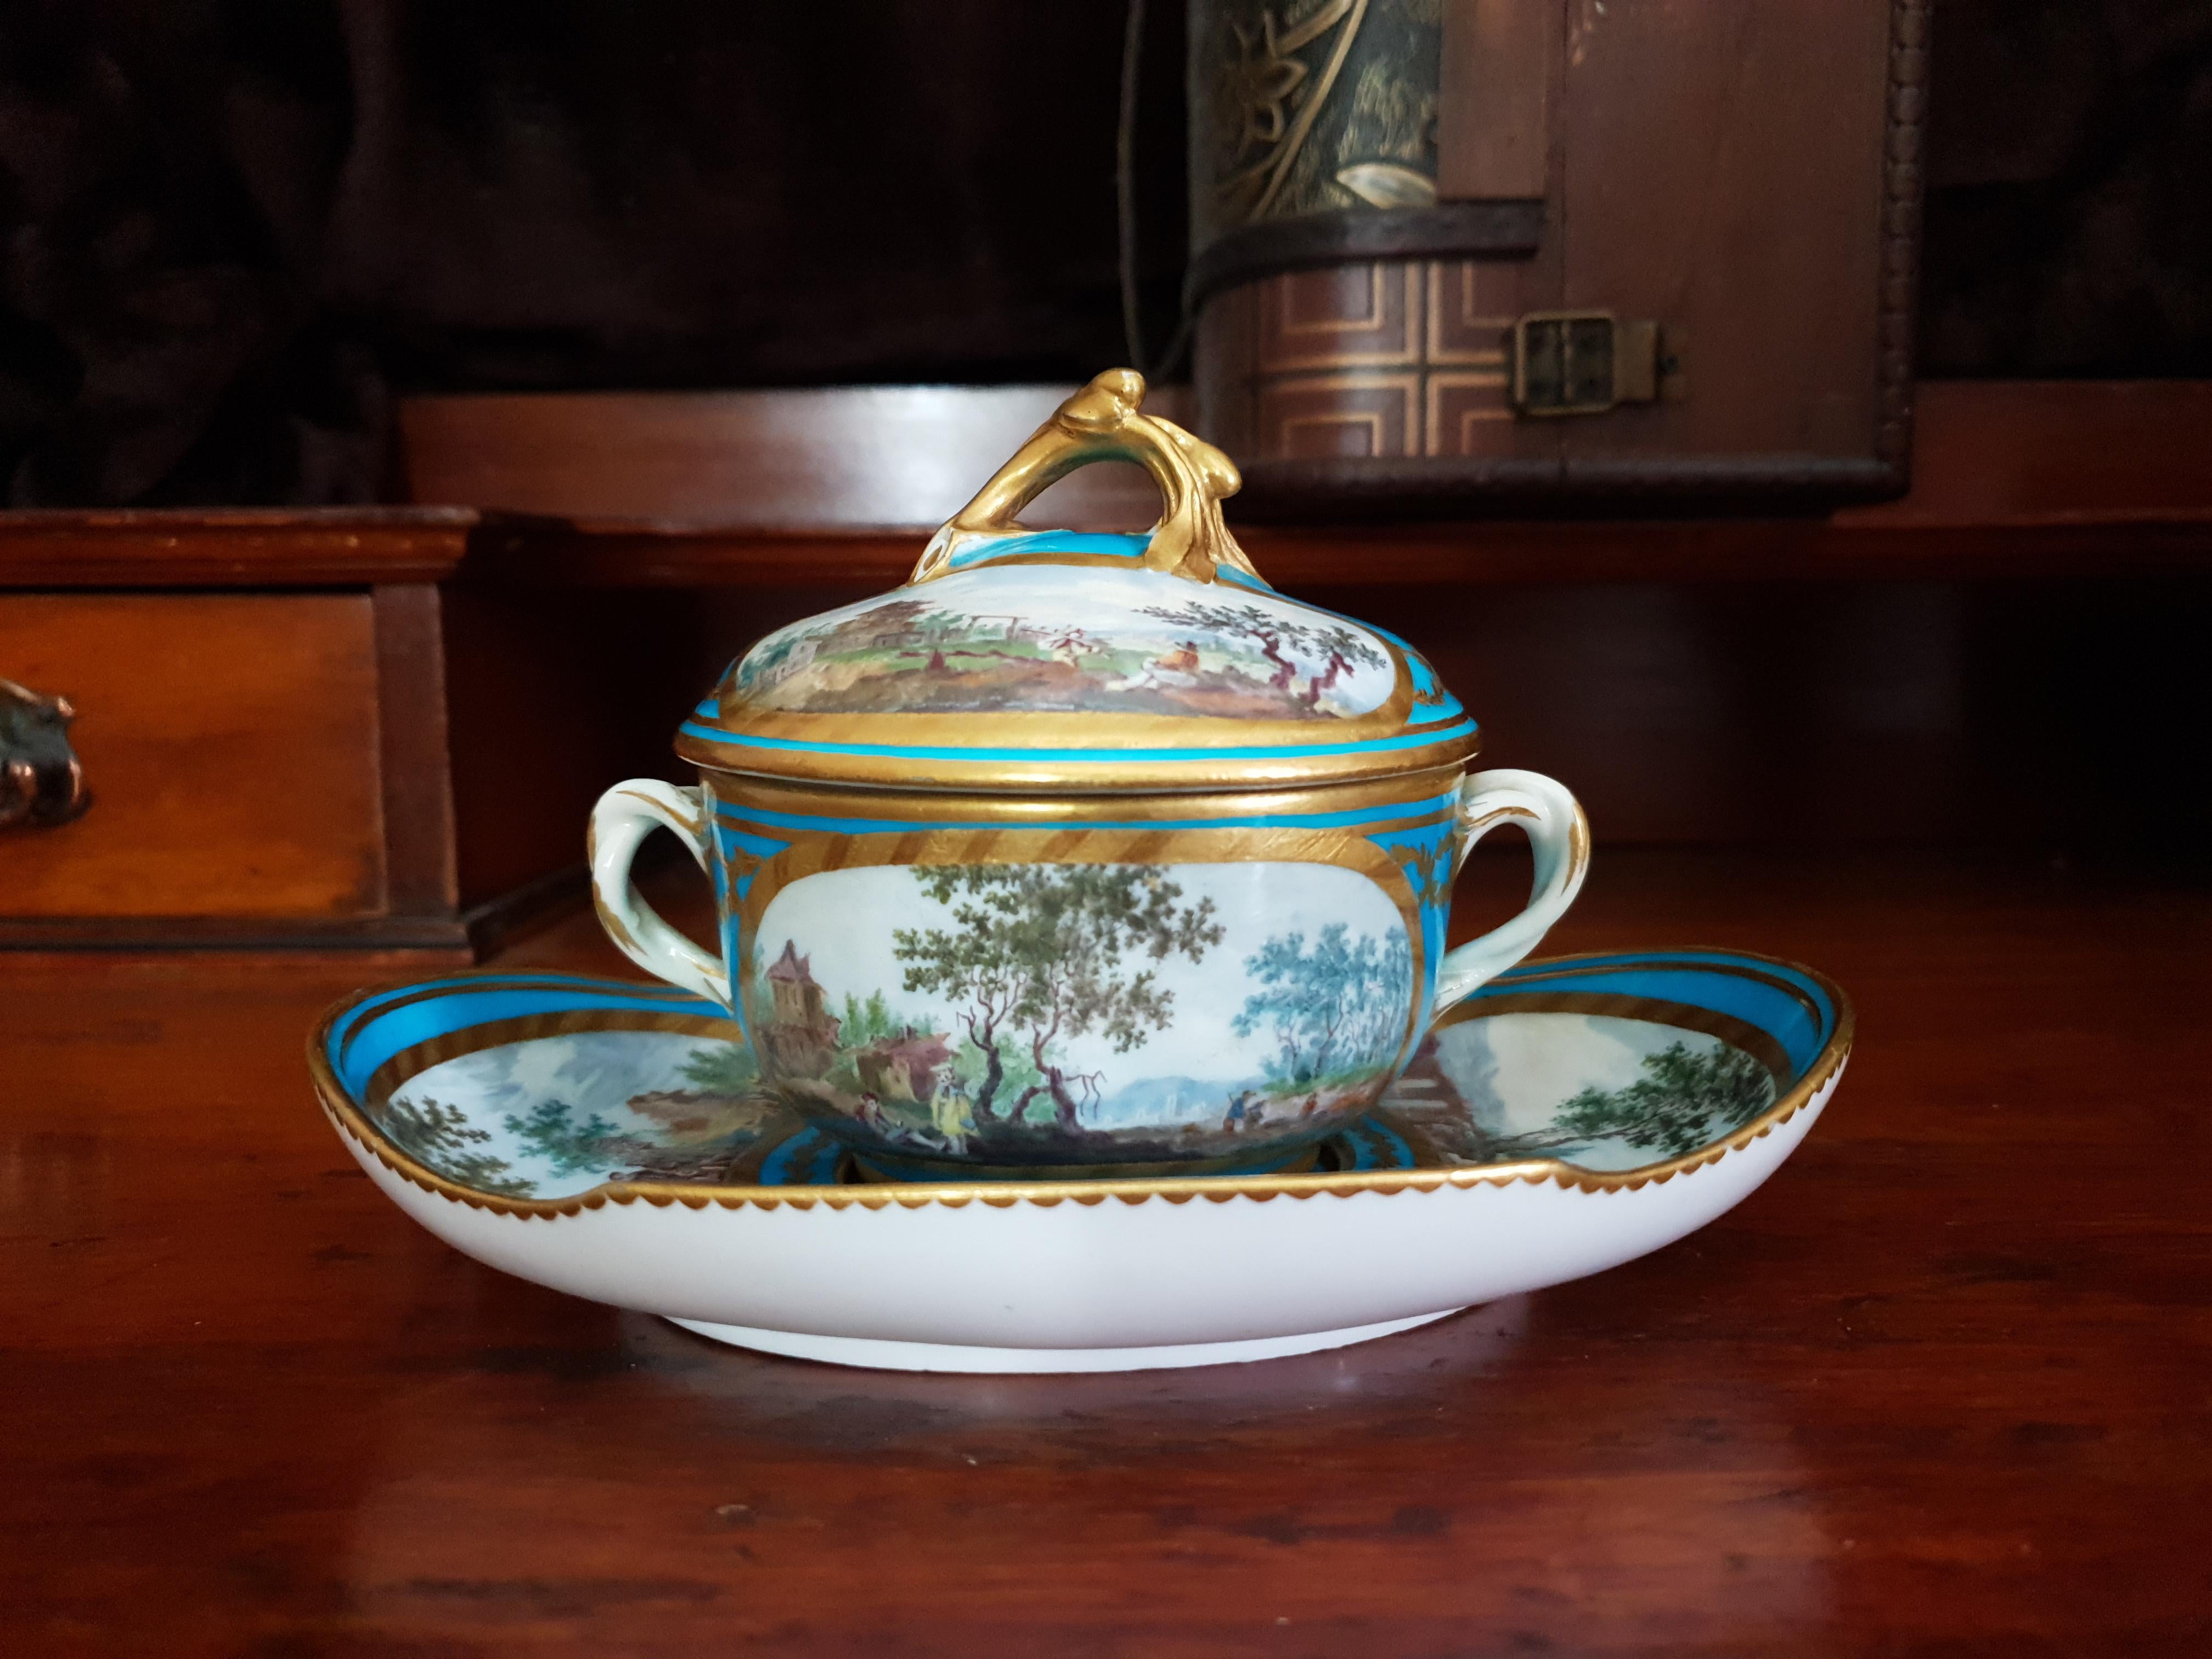 Superb Sevres turquoise collectable lidded chocolate cup and saucer with hand painted scenes of nature. An acanthus moulded gilt handle sits atop the lid with two vignettes of hand painted scenes of nature on either side of the handle. On either